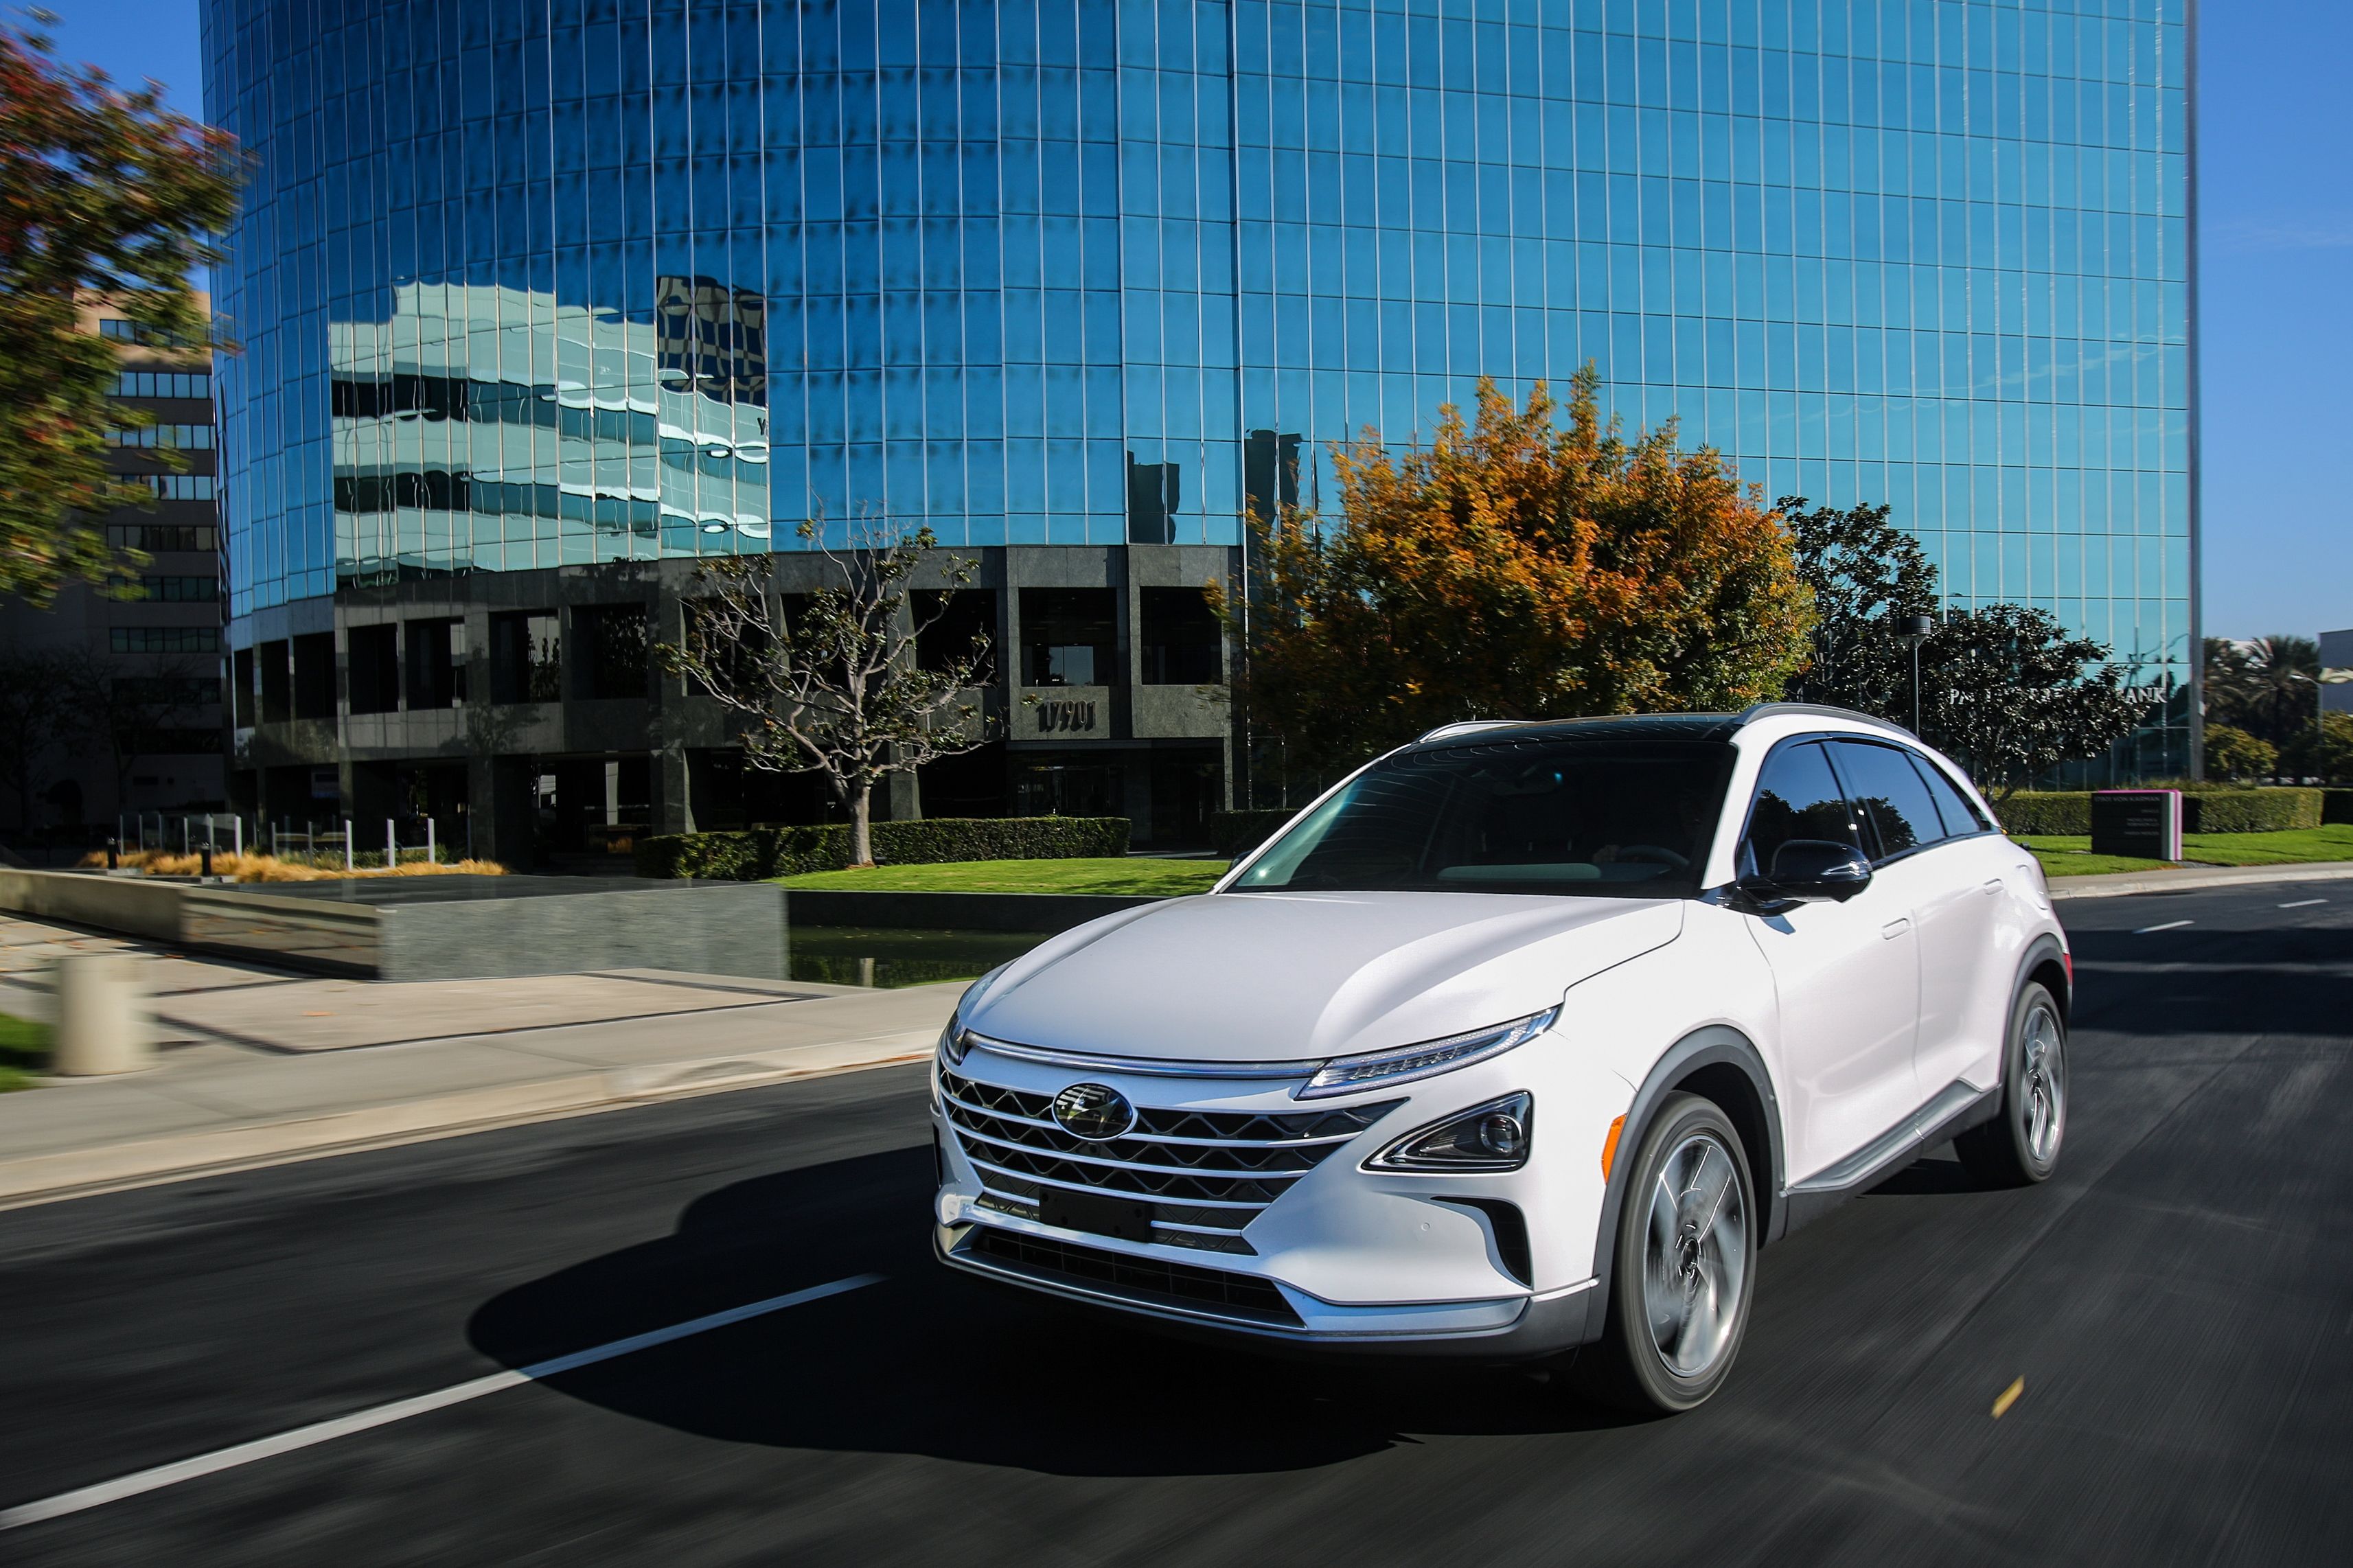 Hyundai Lands Two Eco-Friendly Vehicles on Wards 10 Best Engines List